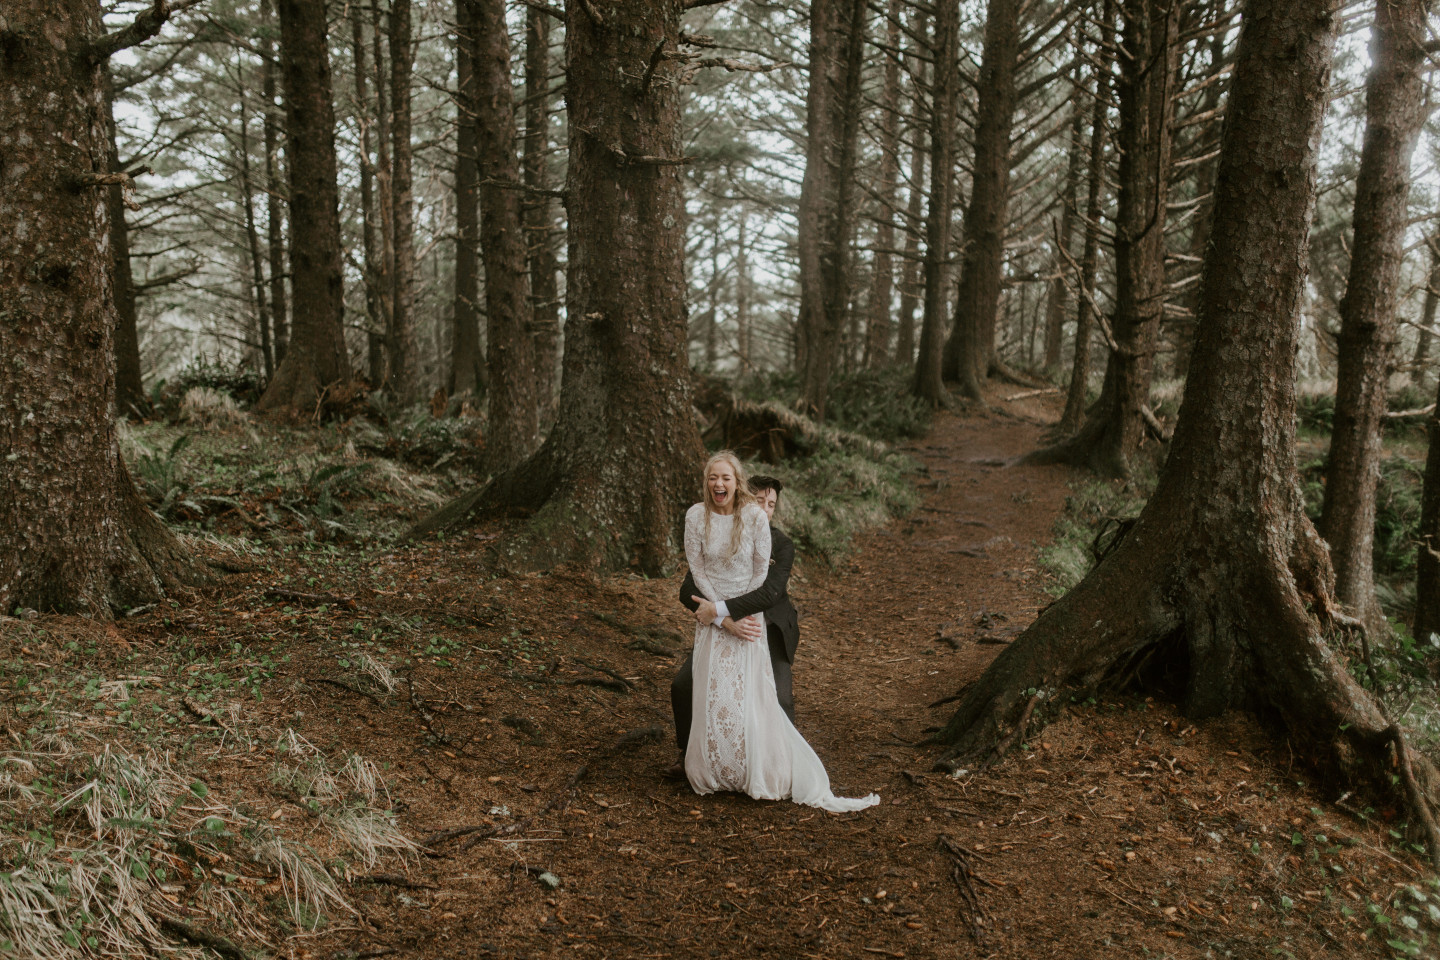 Grant prepares to lift Hannah in the woods of Cannon Beach, Oregon during their Oregon coast elopement. Wedding photography in Portland Oregon by Sienna Plus Josh.